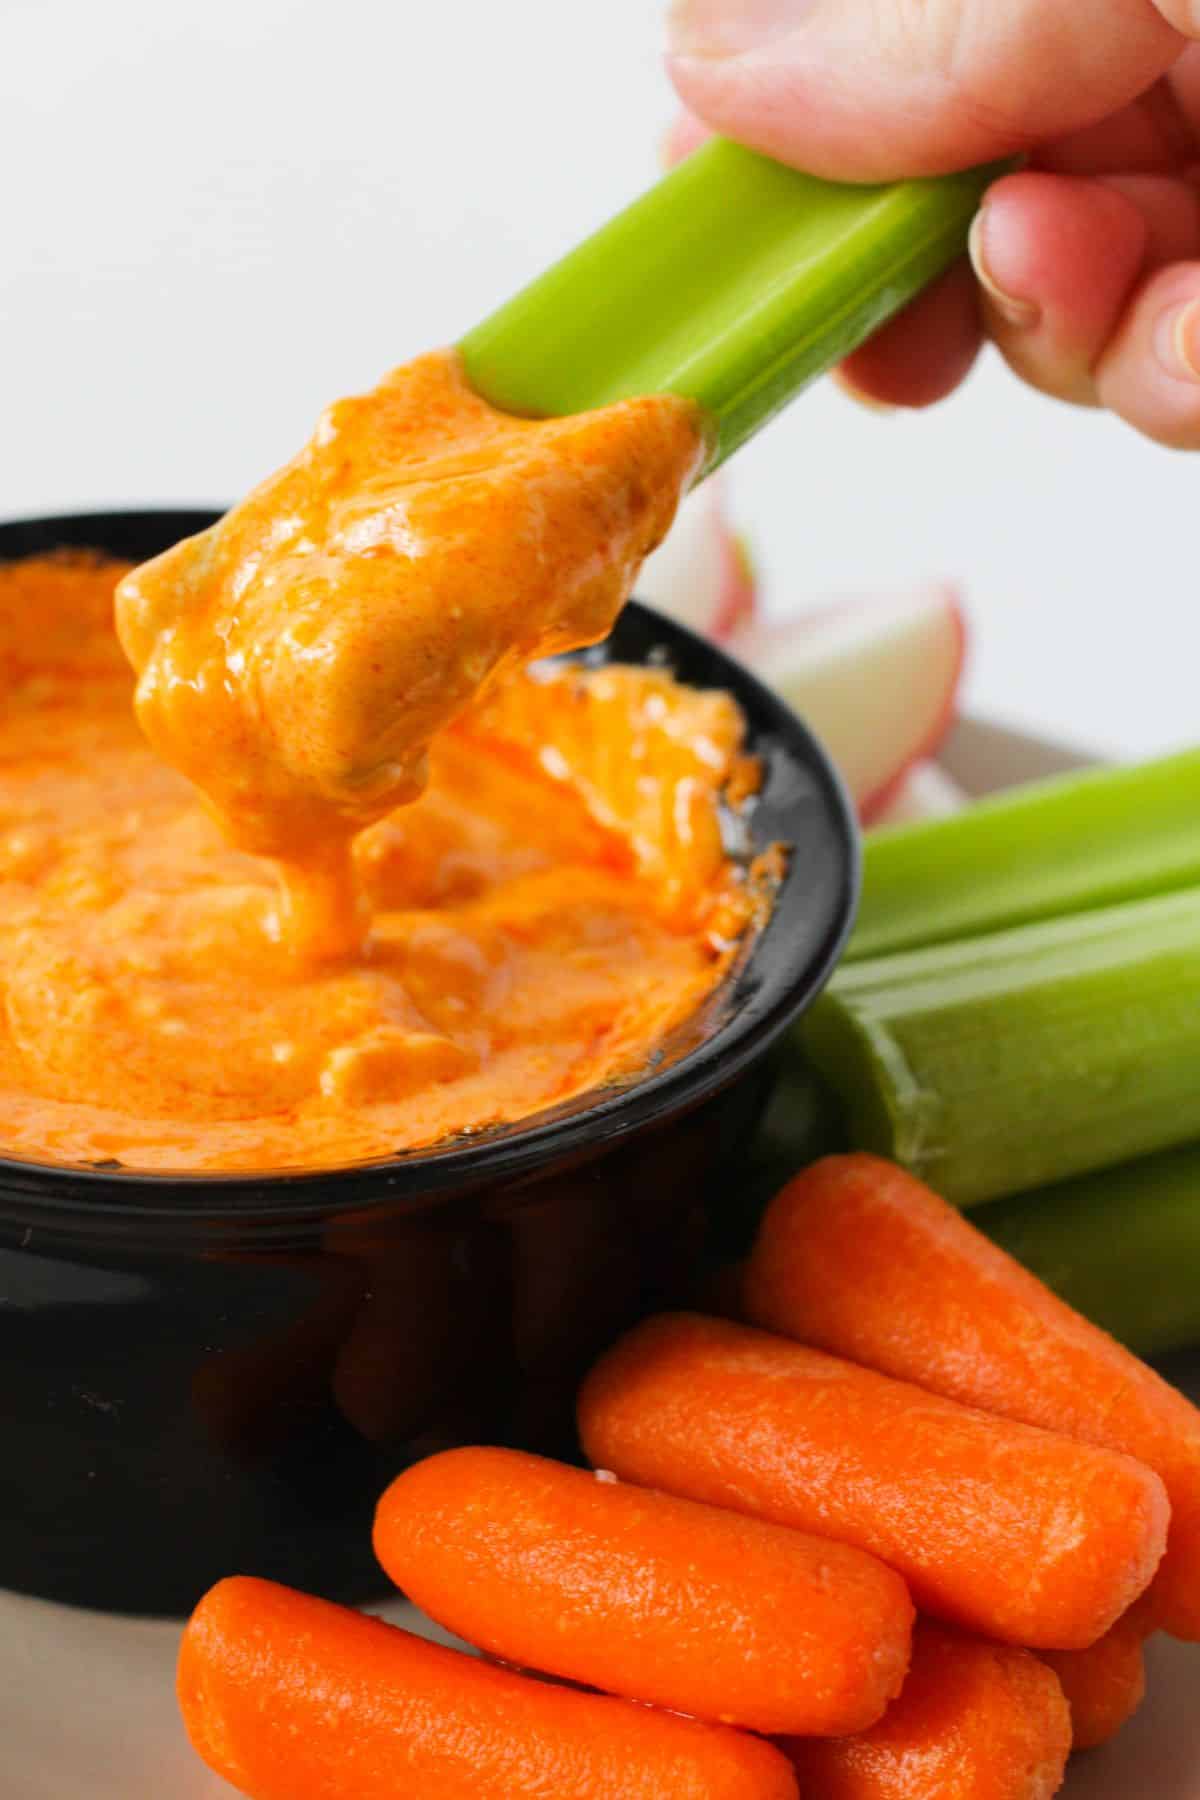 The celery is being dipped in the Slow Cooker Buffalo Chicken Dip with vegetables on the side.